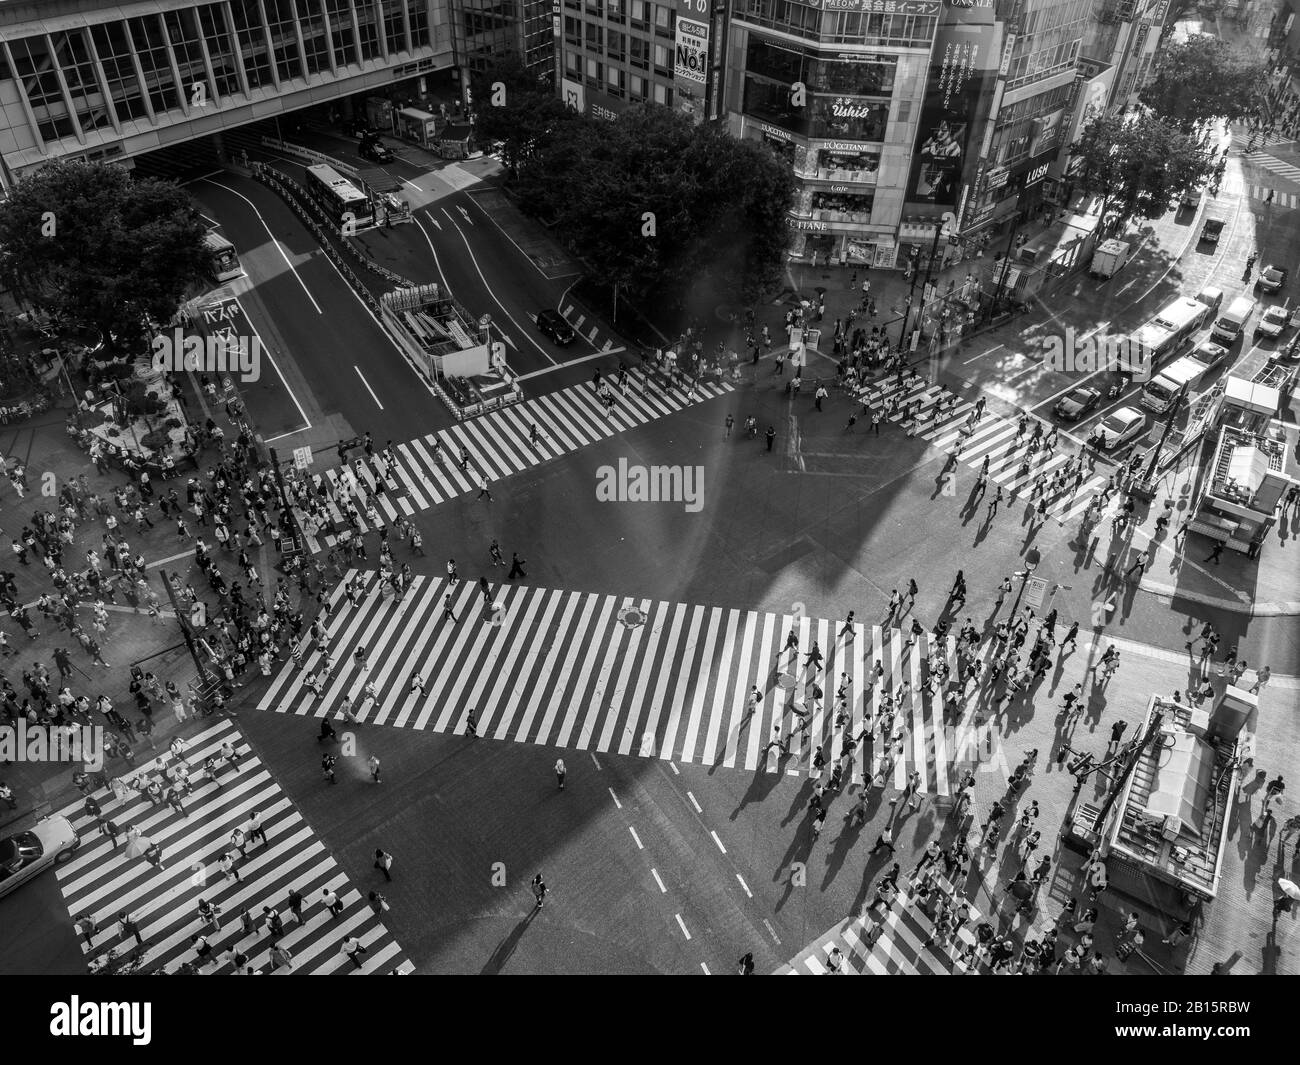 Shibuya, Japan - 23 9 19: People Crossing Shibuya Crossing in the evening with the full crossing in view Stock Photo